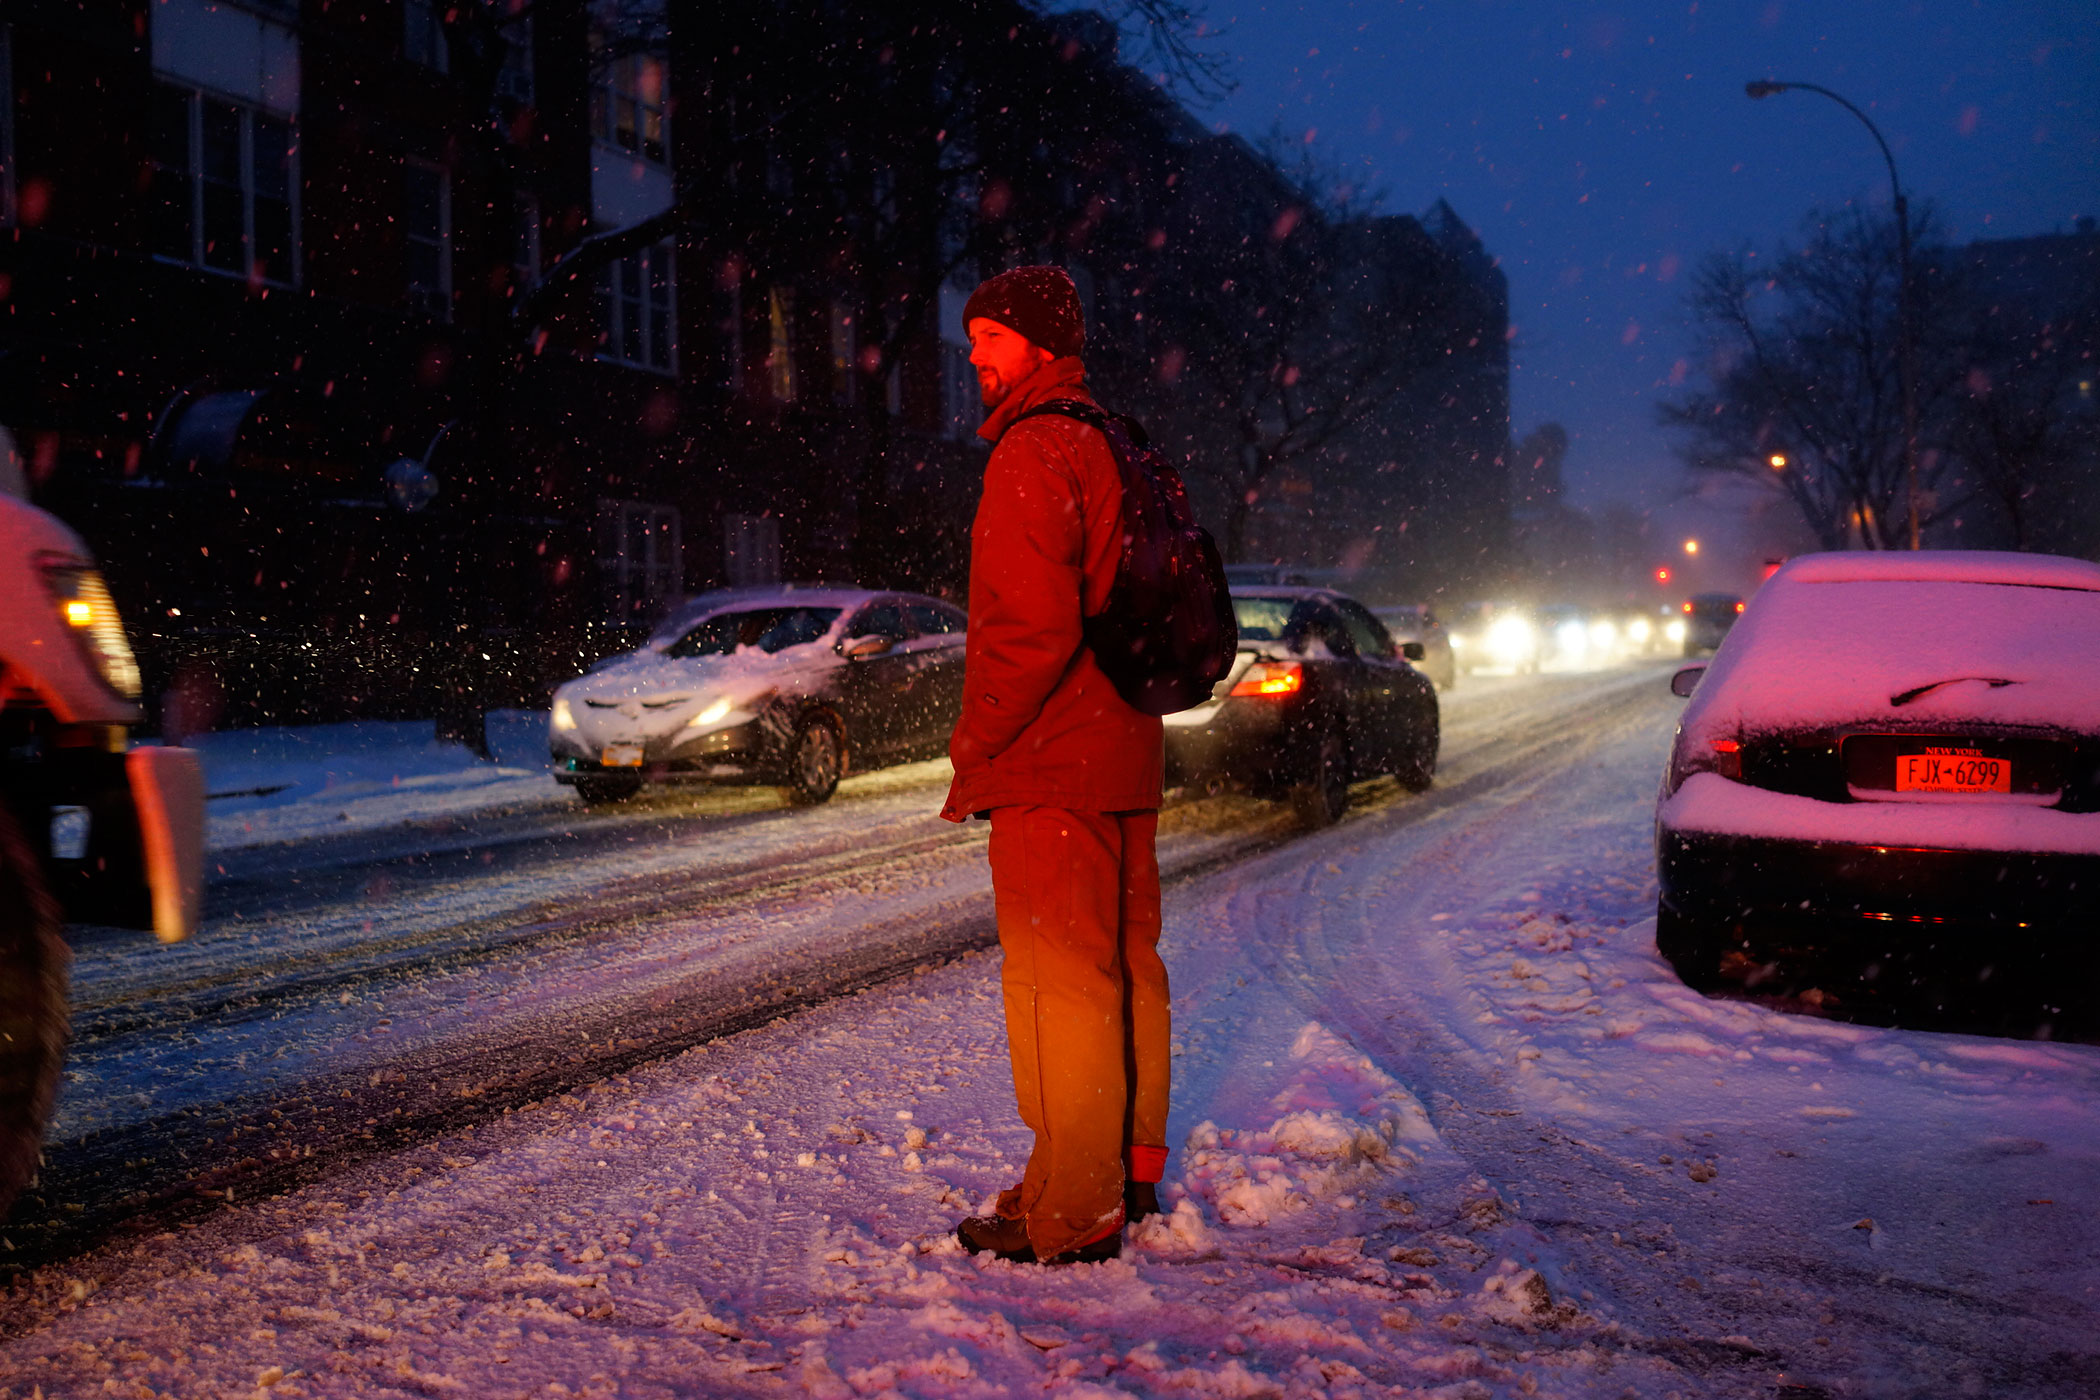 A man waits to cross the street in Brooklyn, NY on Jan. 26, 2015Photograph by Andrew Hinderaker